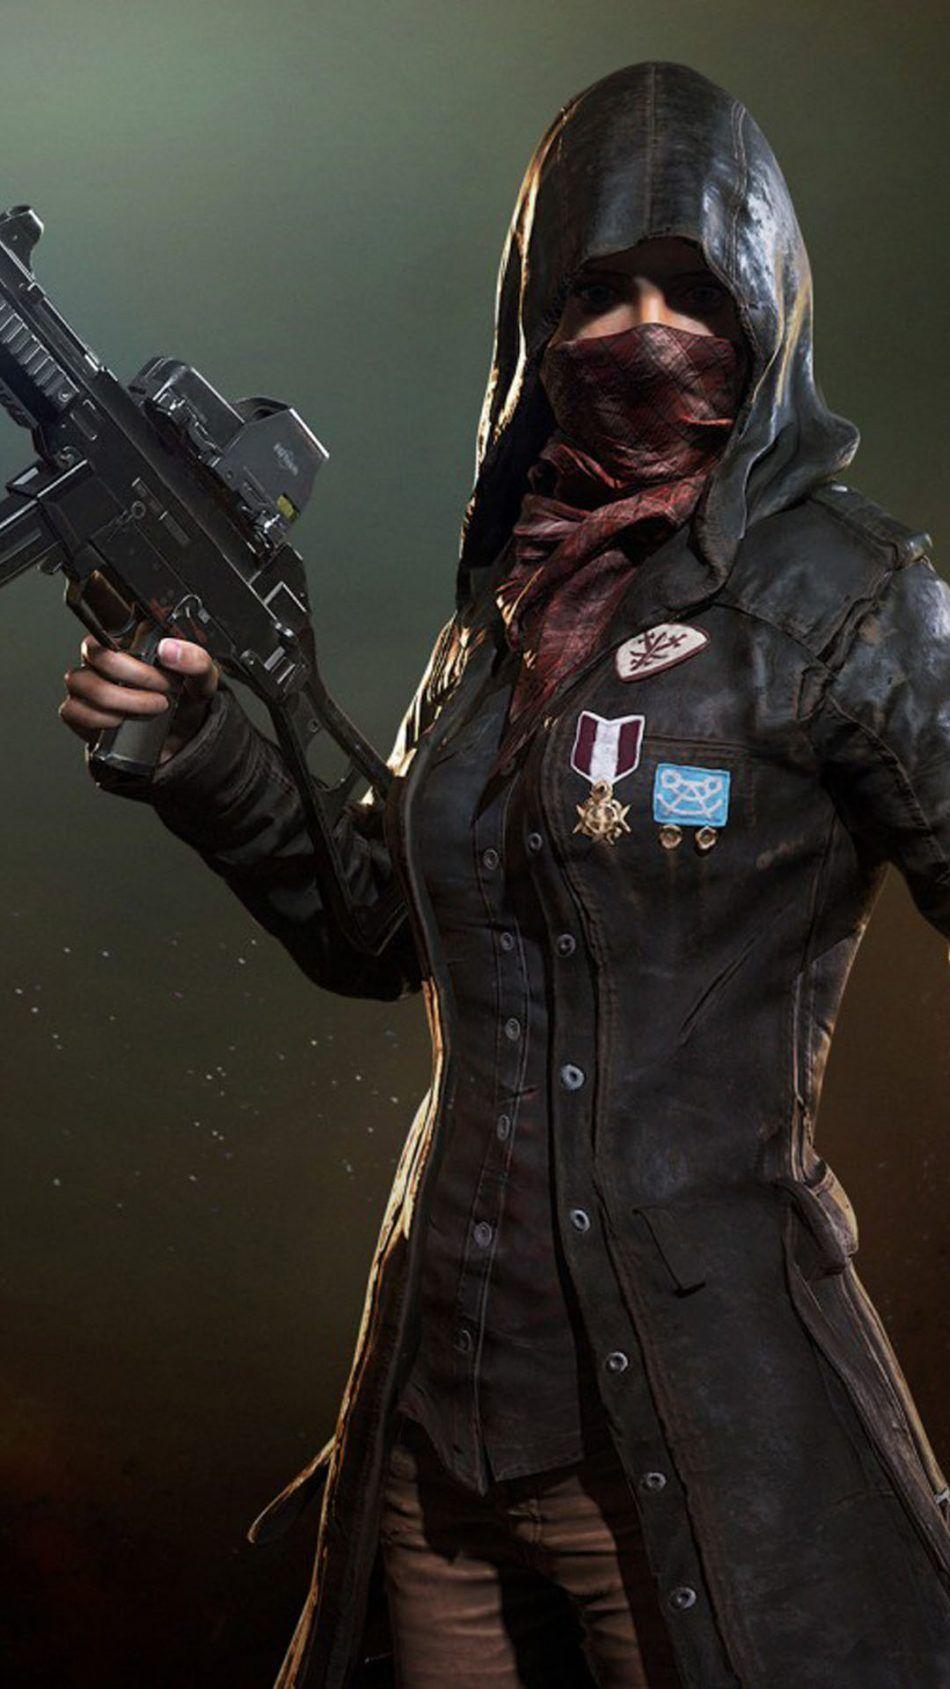 PUBG Female Player In Mask. Blue wallpaper iphone